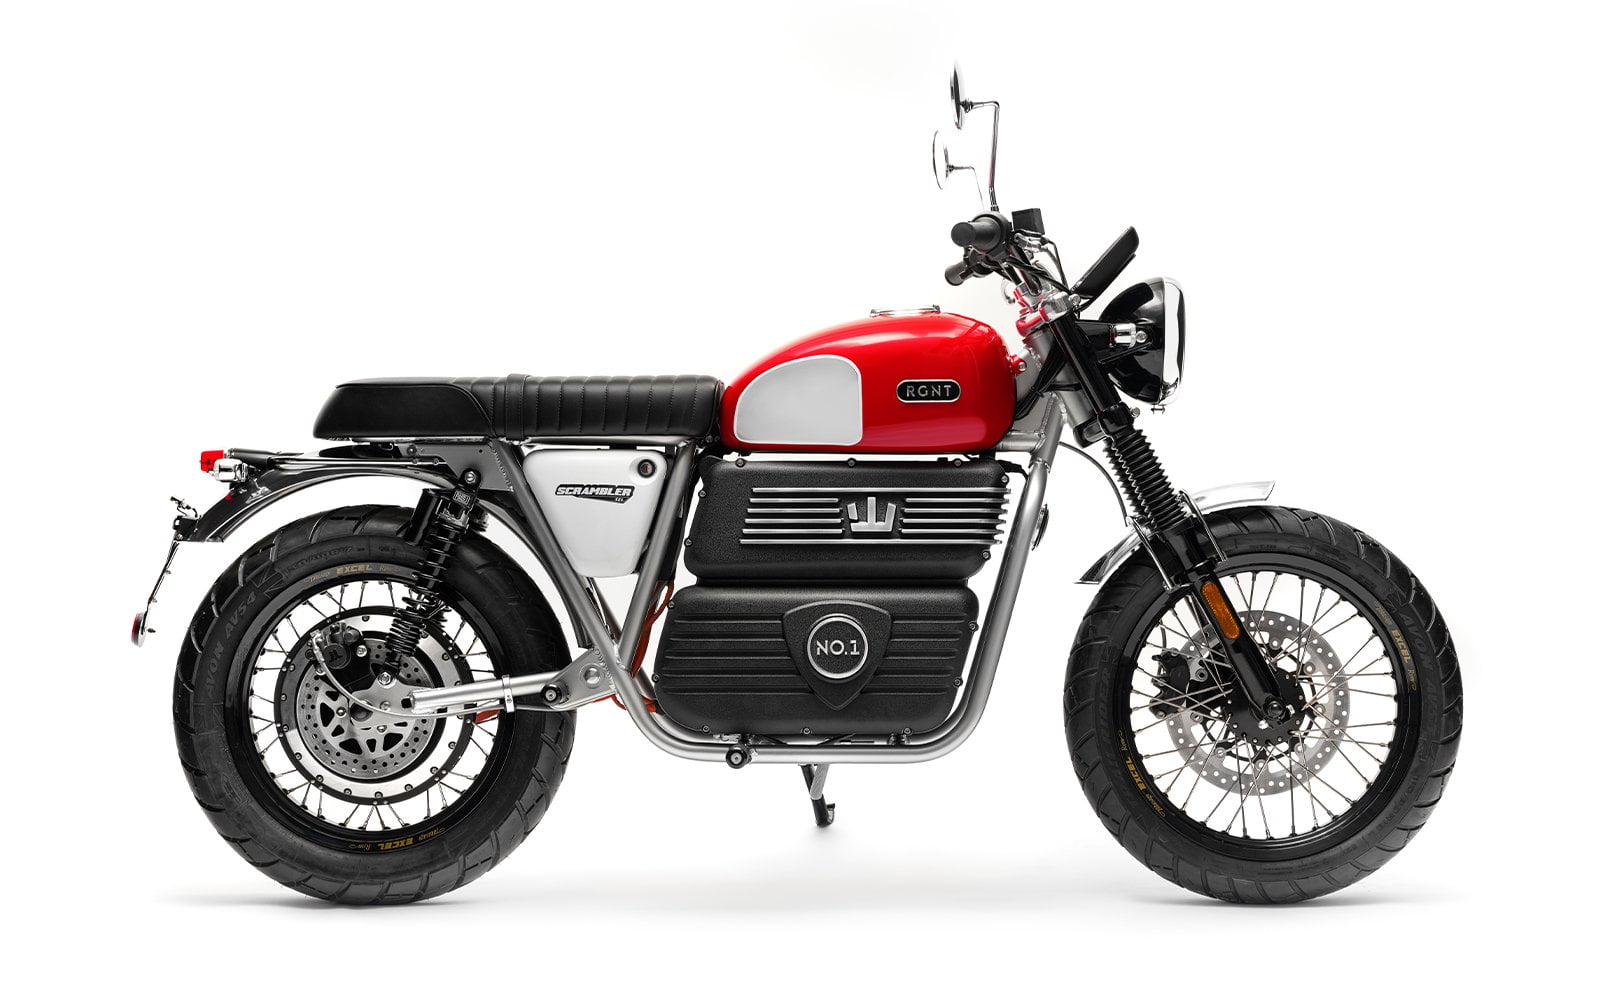 https://electriccarfinder.com/gnt-electric-motorcycles-price-range-and-specs/